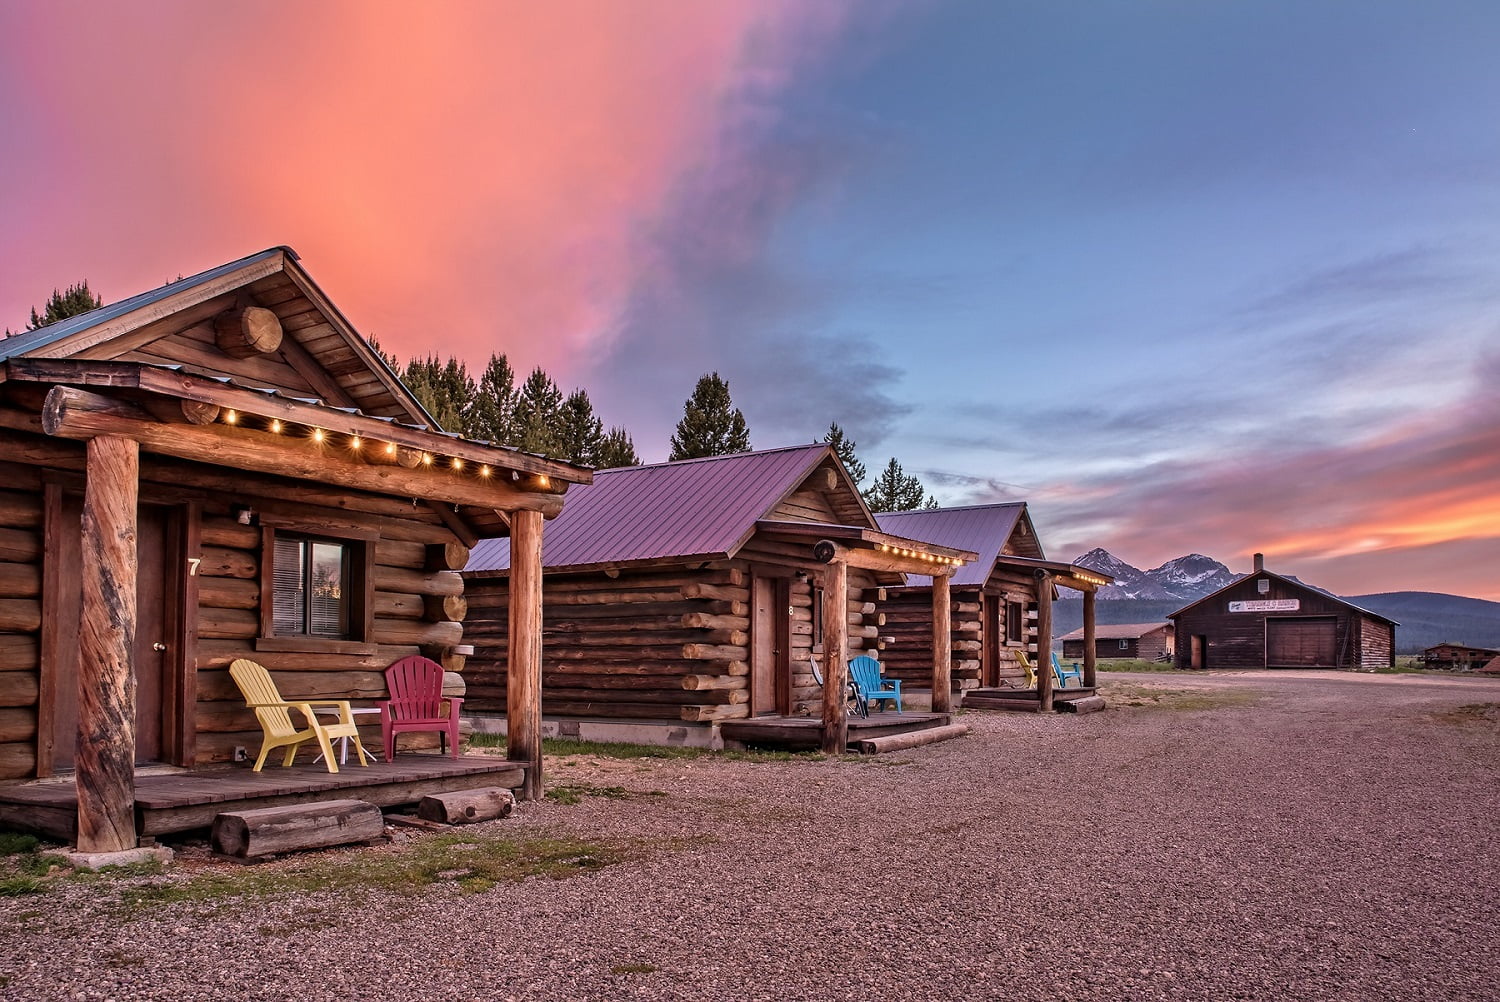 Cabins with beautiful sky in the background